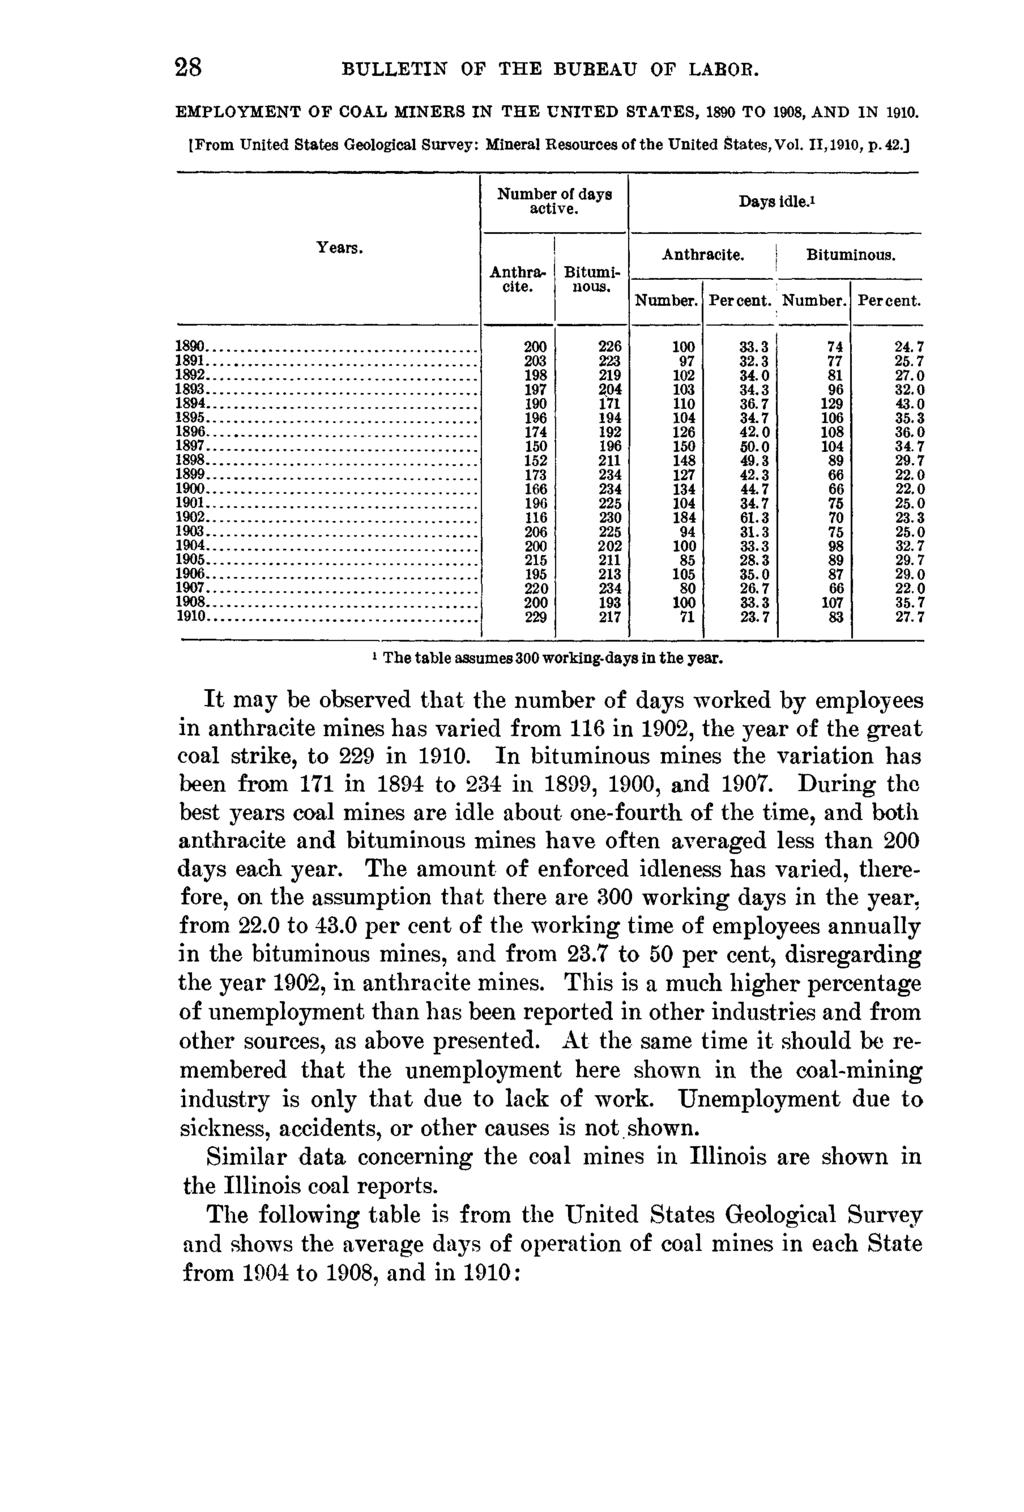 28 BULLETIN OF THE BTJBEAU OF LABOB. EMPLOYMENT OF COAL MINERS IN THE UNITED STATES, 1890 TO 1908, AND IN 1910. IFrom United States Geological Survey: Mineral Resources of the United States, Vol.